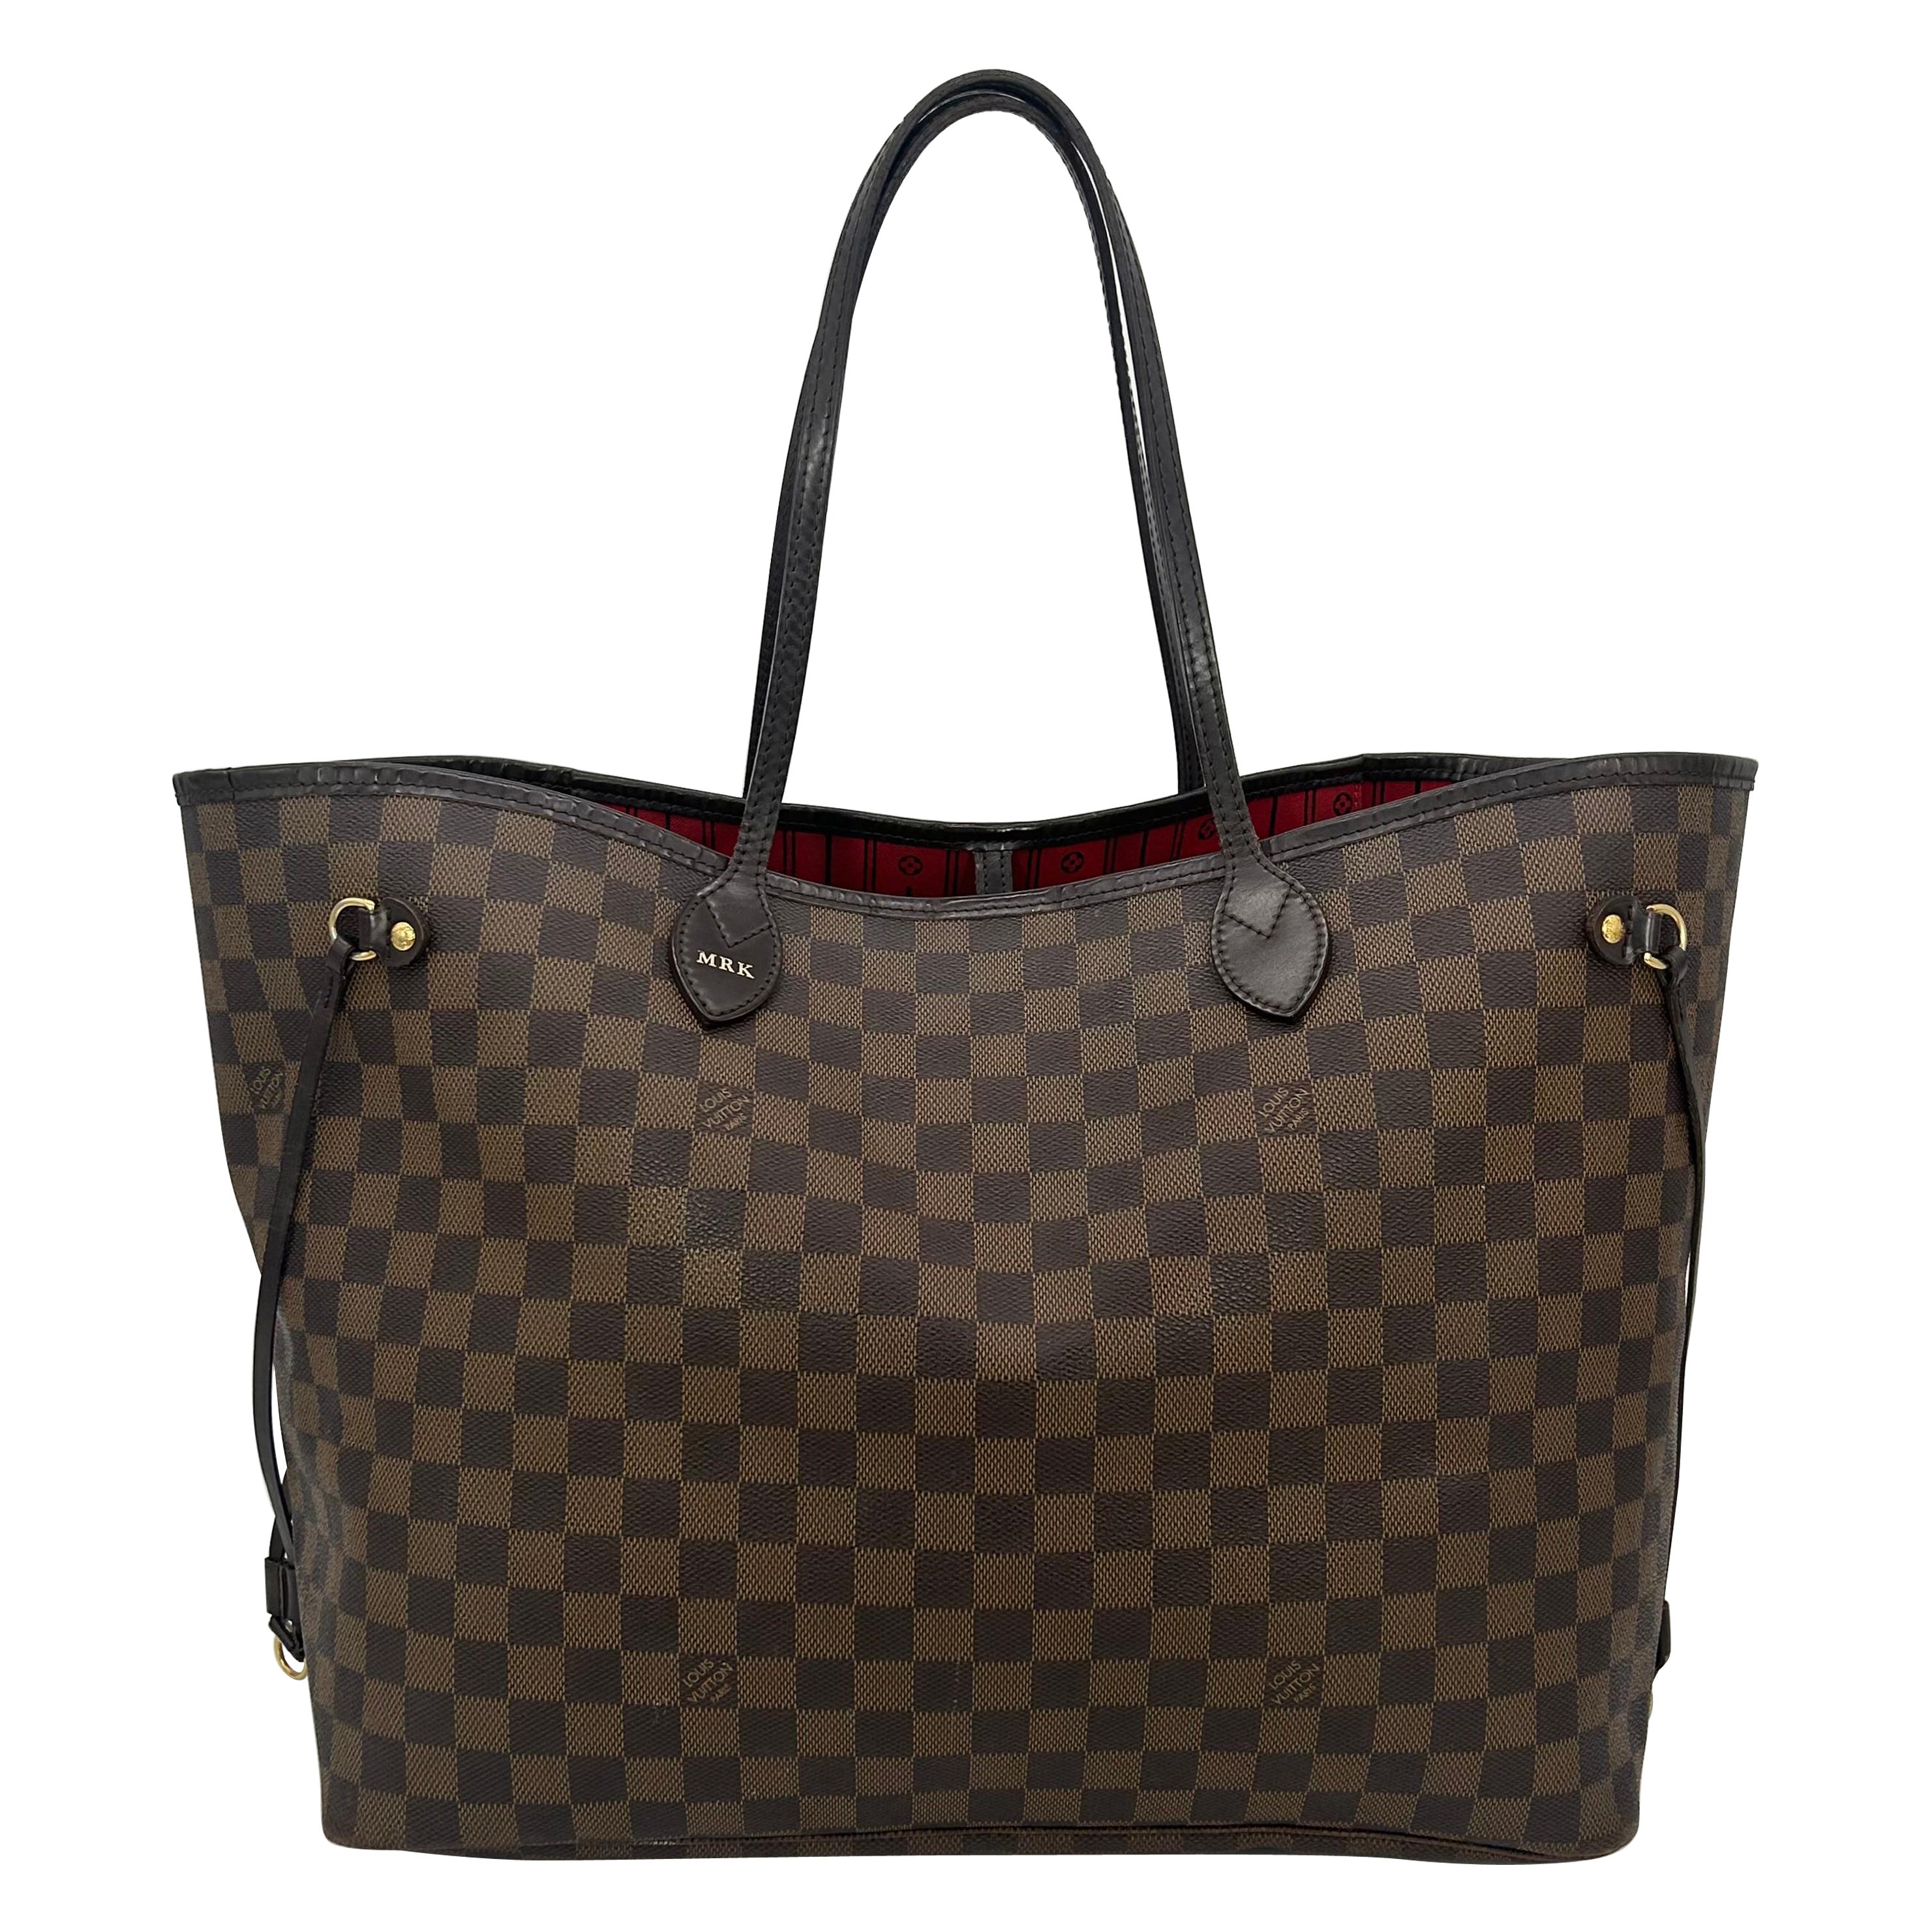 How can I spot a fake Neverfull bag?